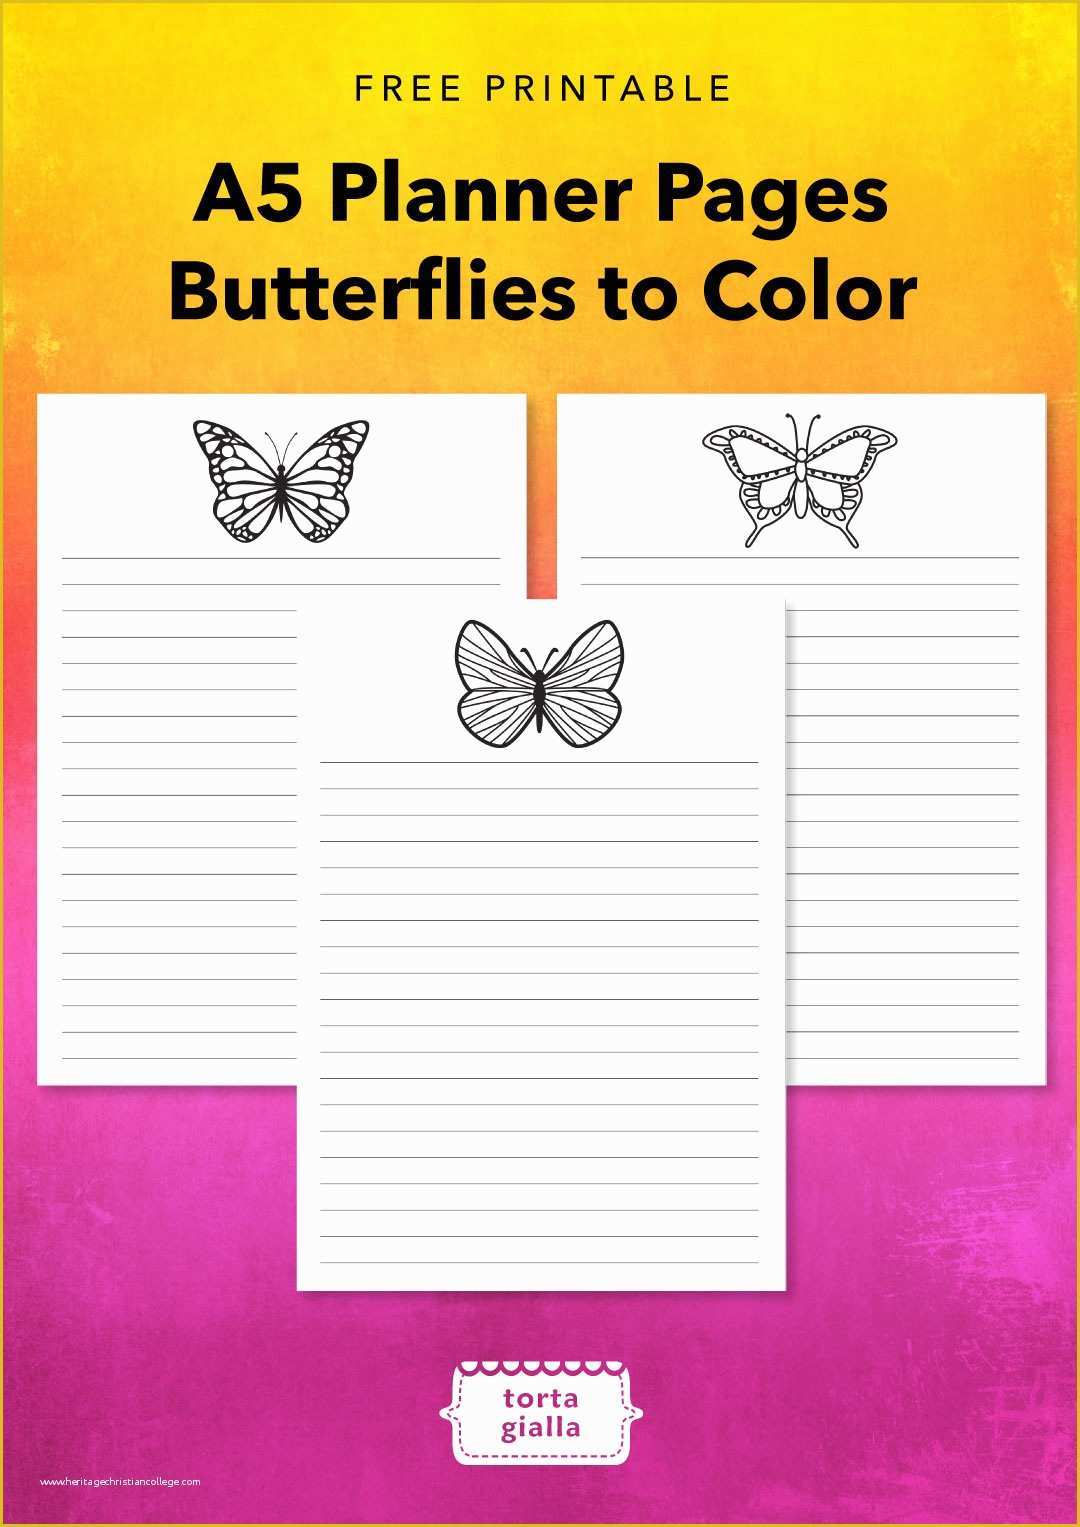 Free Diy Website Templates Of Free Printable A5 Planner Pages butterflies to Color